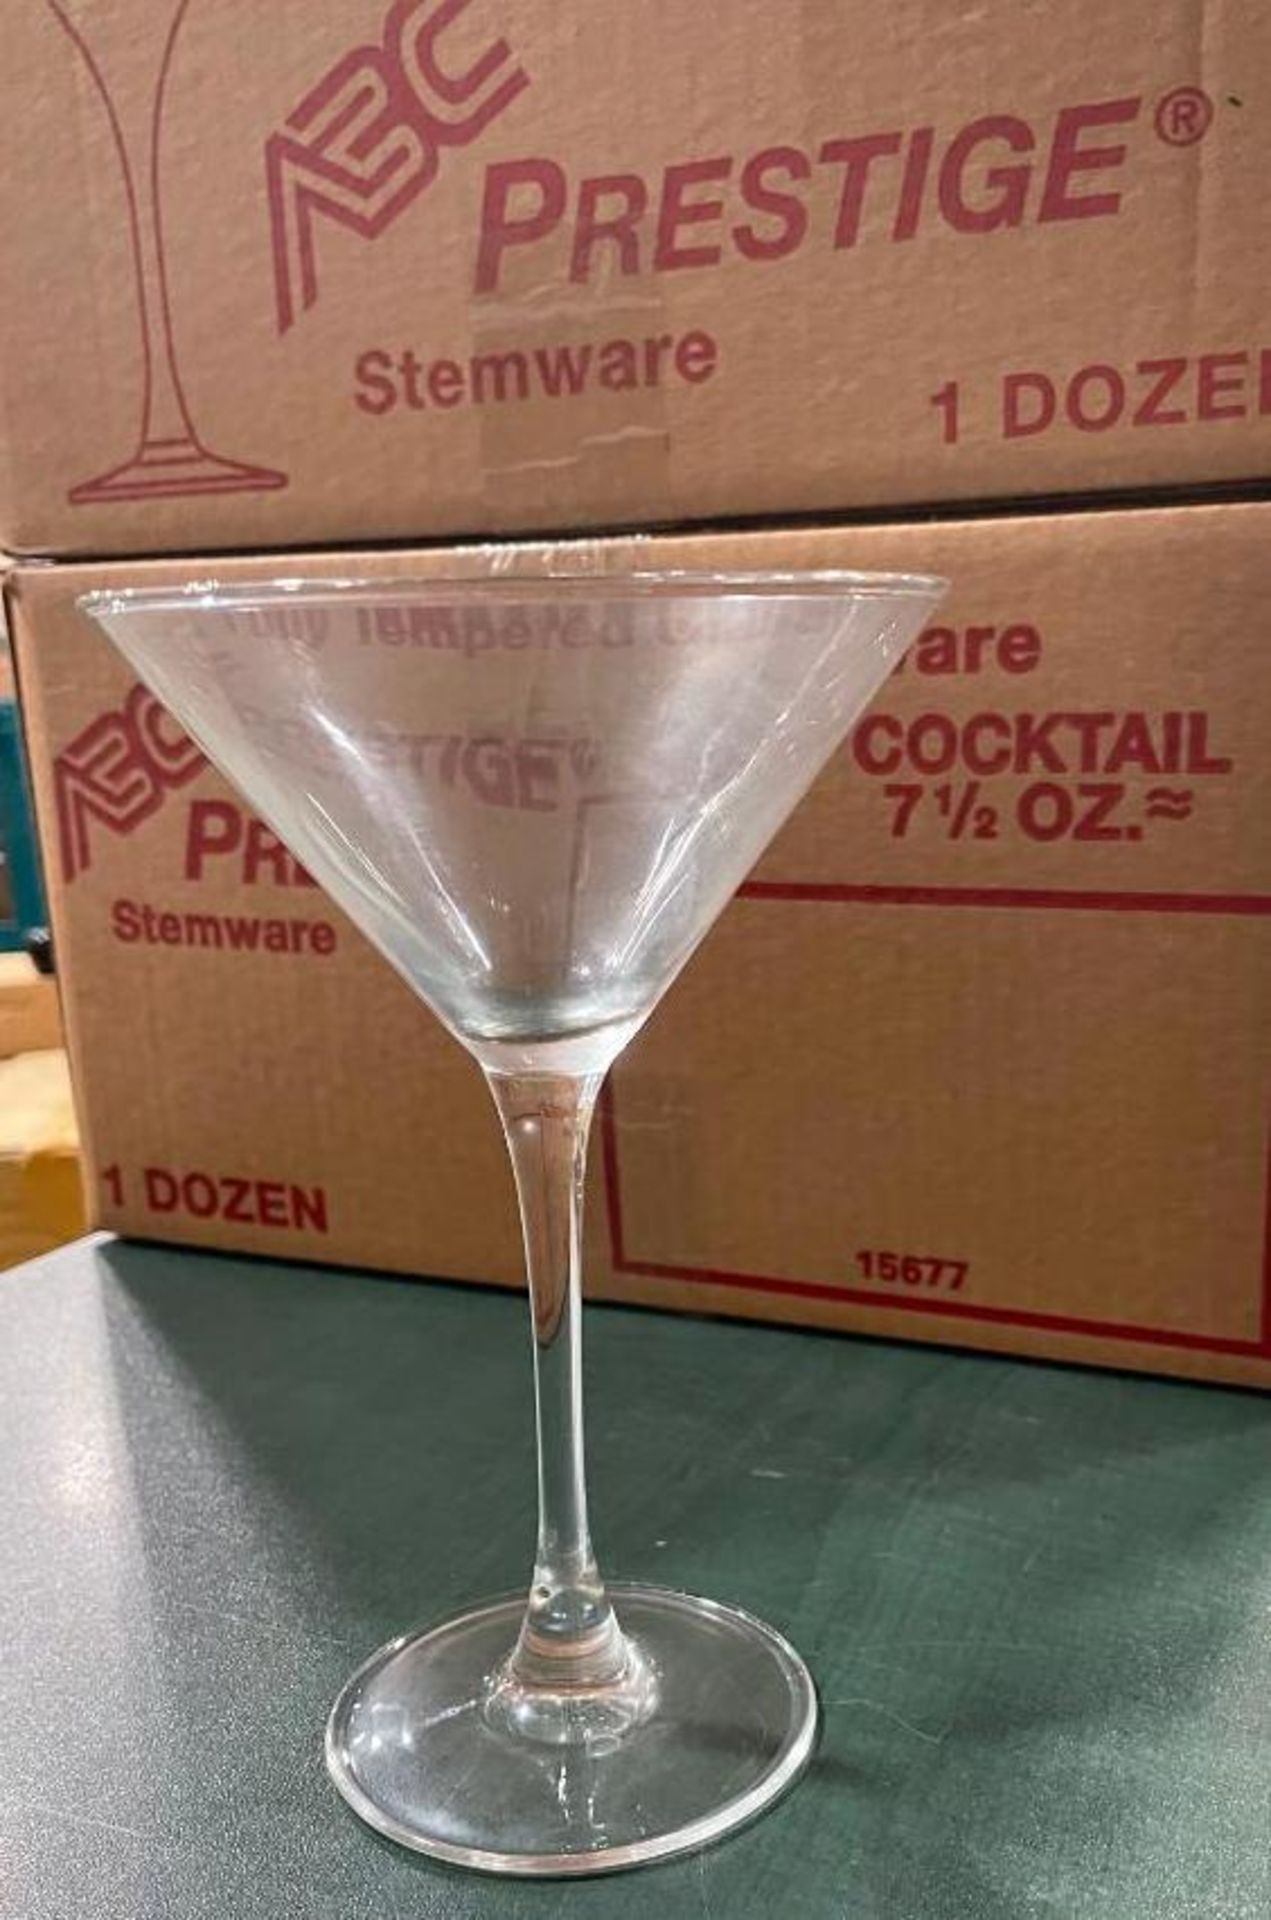 ABC PRESTIGE FULLY TEMPERED 7.5OZ COCKTAIL GLASSES - LOT OF 50 - NEW - Image 3 of 3